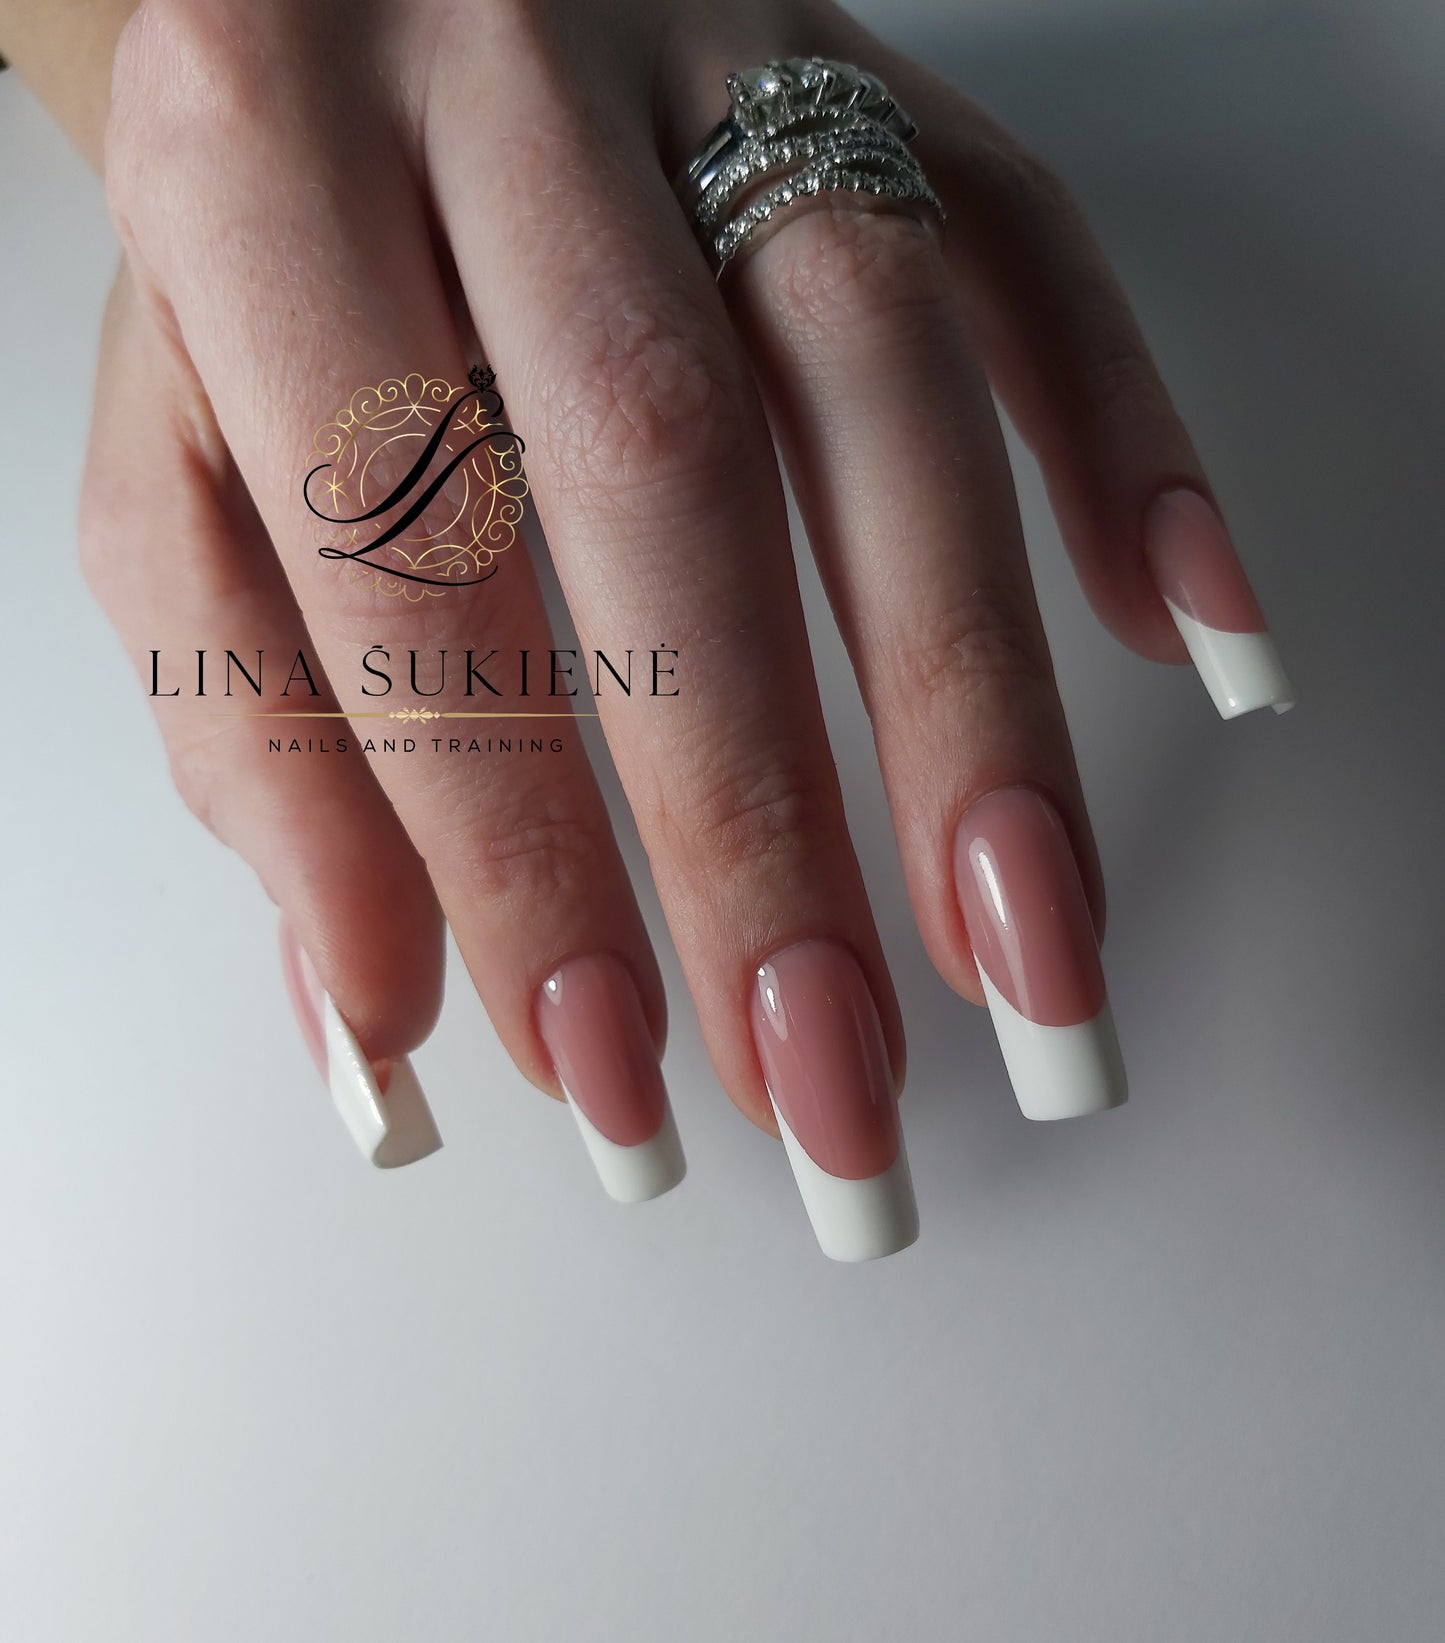 BEGINNERS HARD GEL NAILS EXTENSIONS COURSE